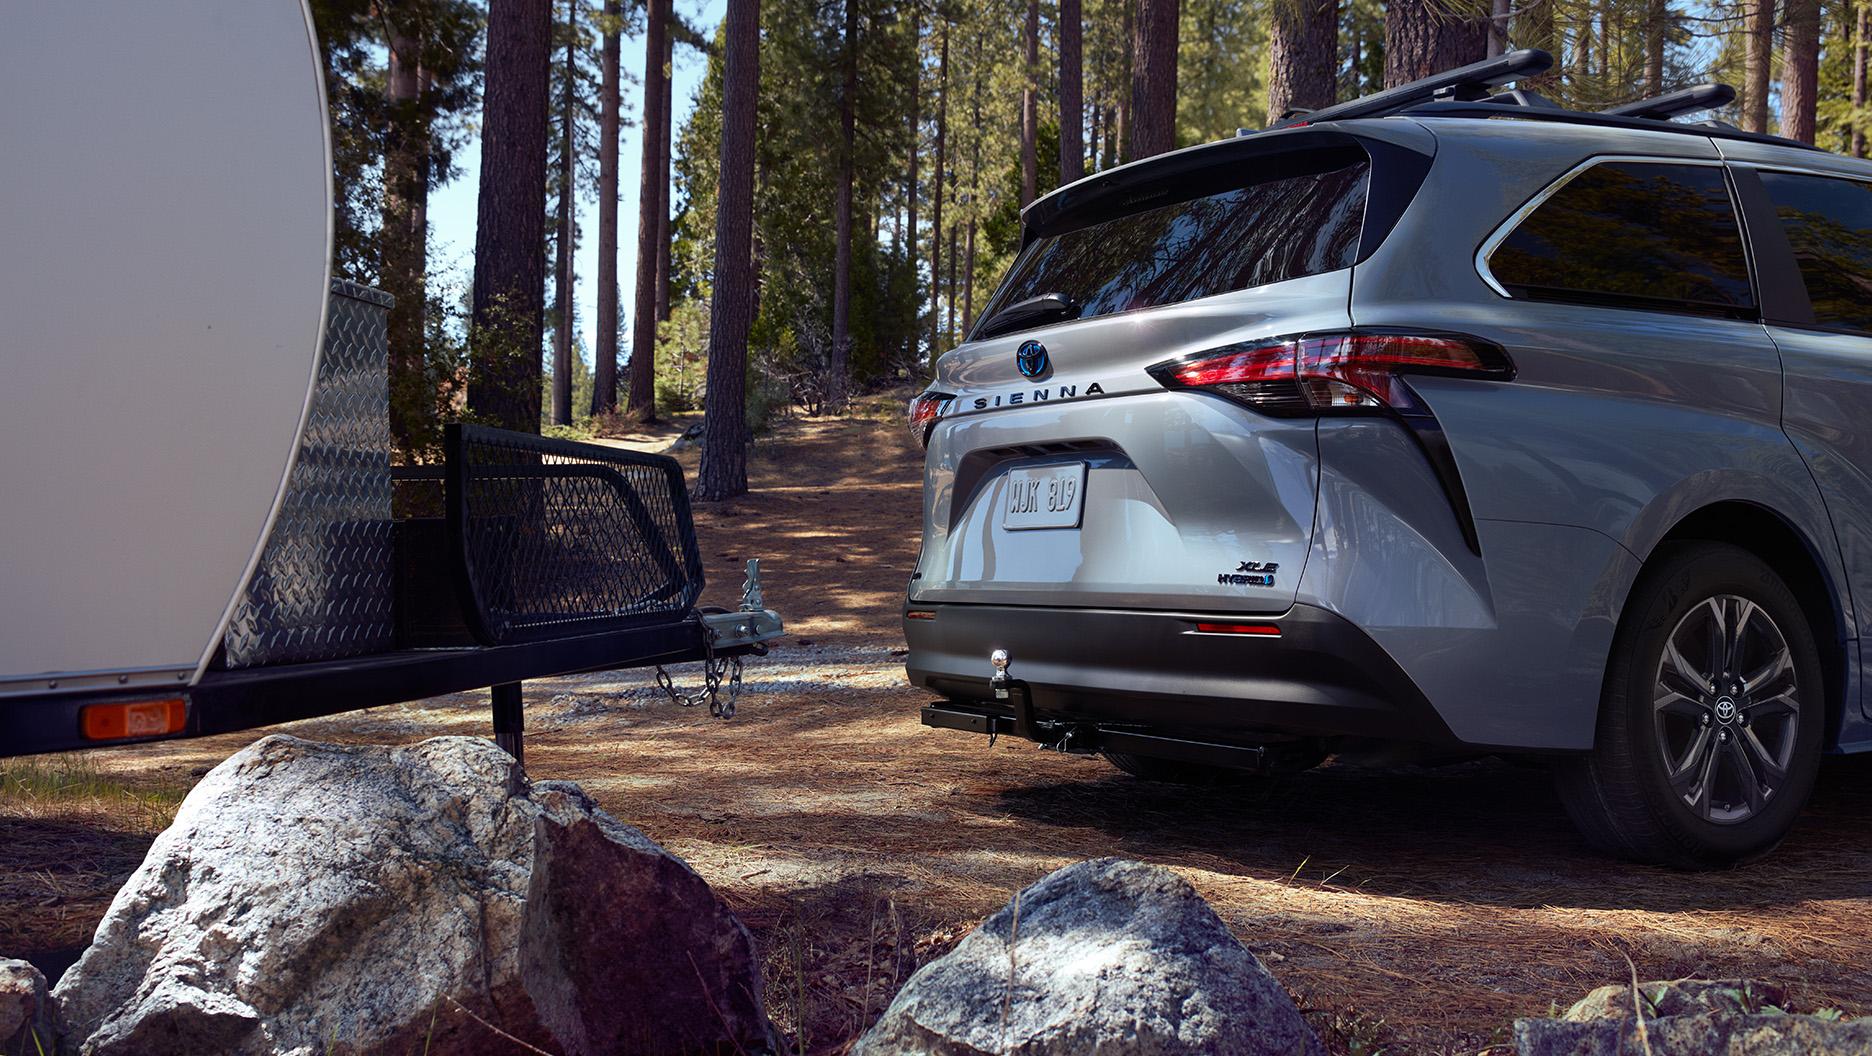 2024 Toyota Sienna sitting in front of a camper having just unhitched at a campsite in the woods